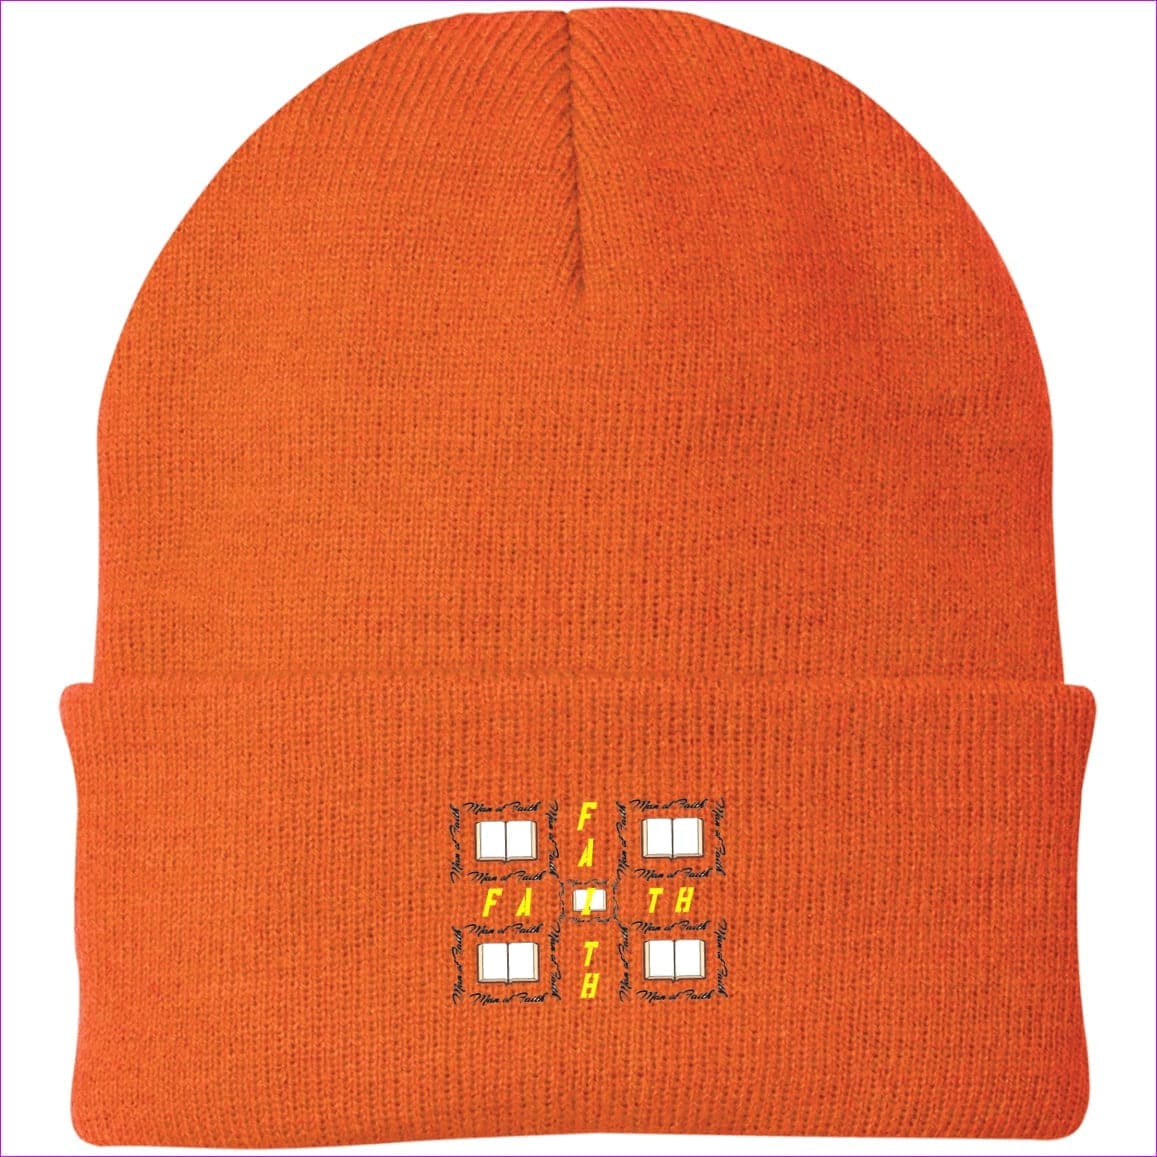 Man of Faith Embroidered Port Authority Knit Cap-Hats-Faith Embroidered Port Authority Knit Cap-TFC&H Co.